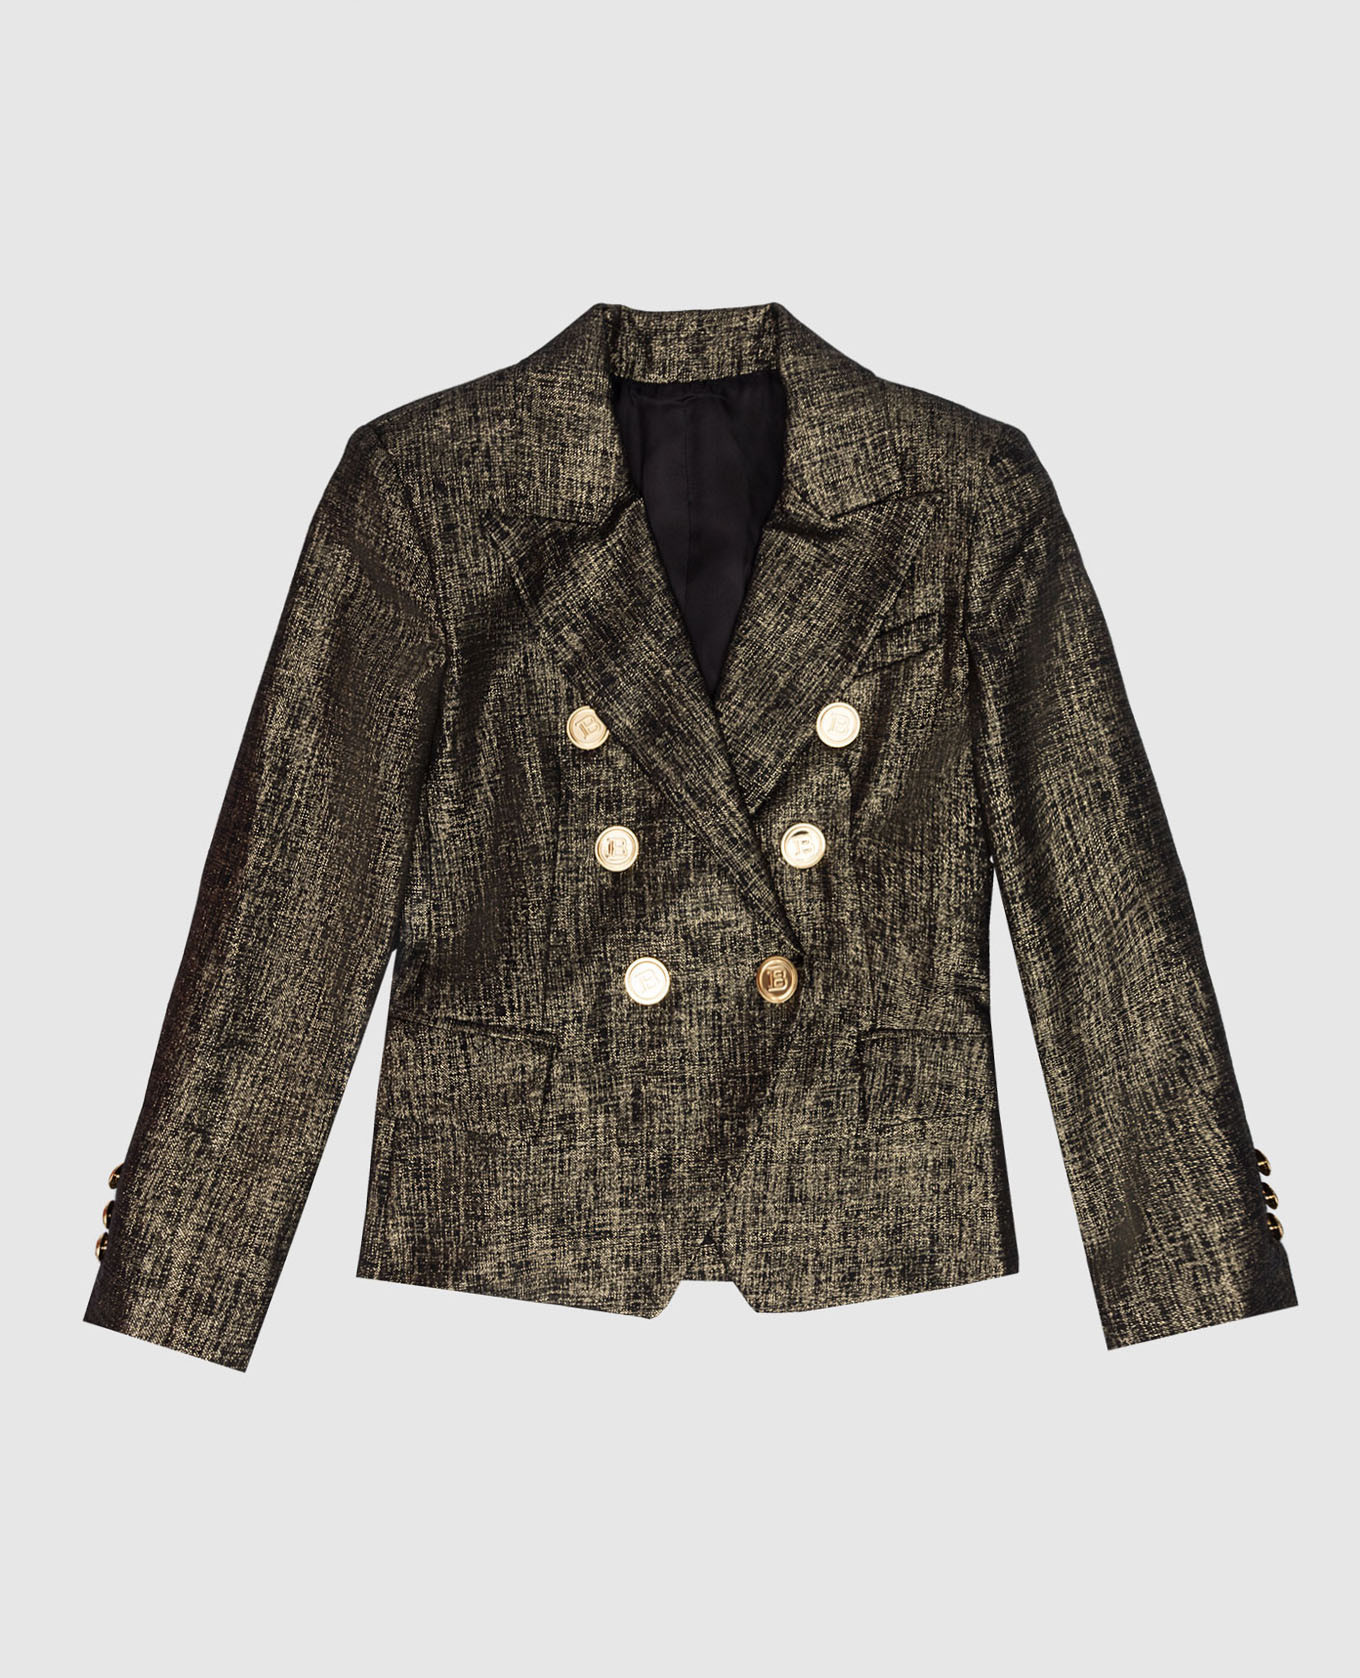 Children's black double-breasted jacket with lurex